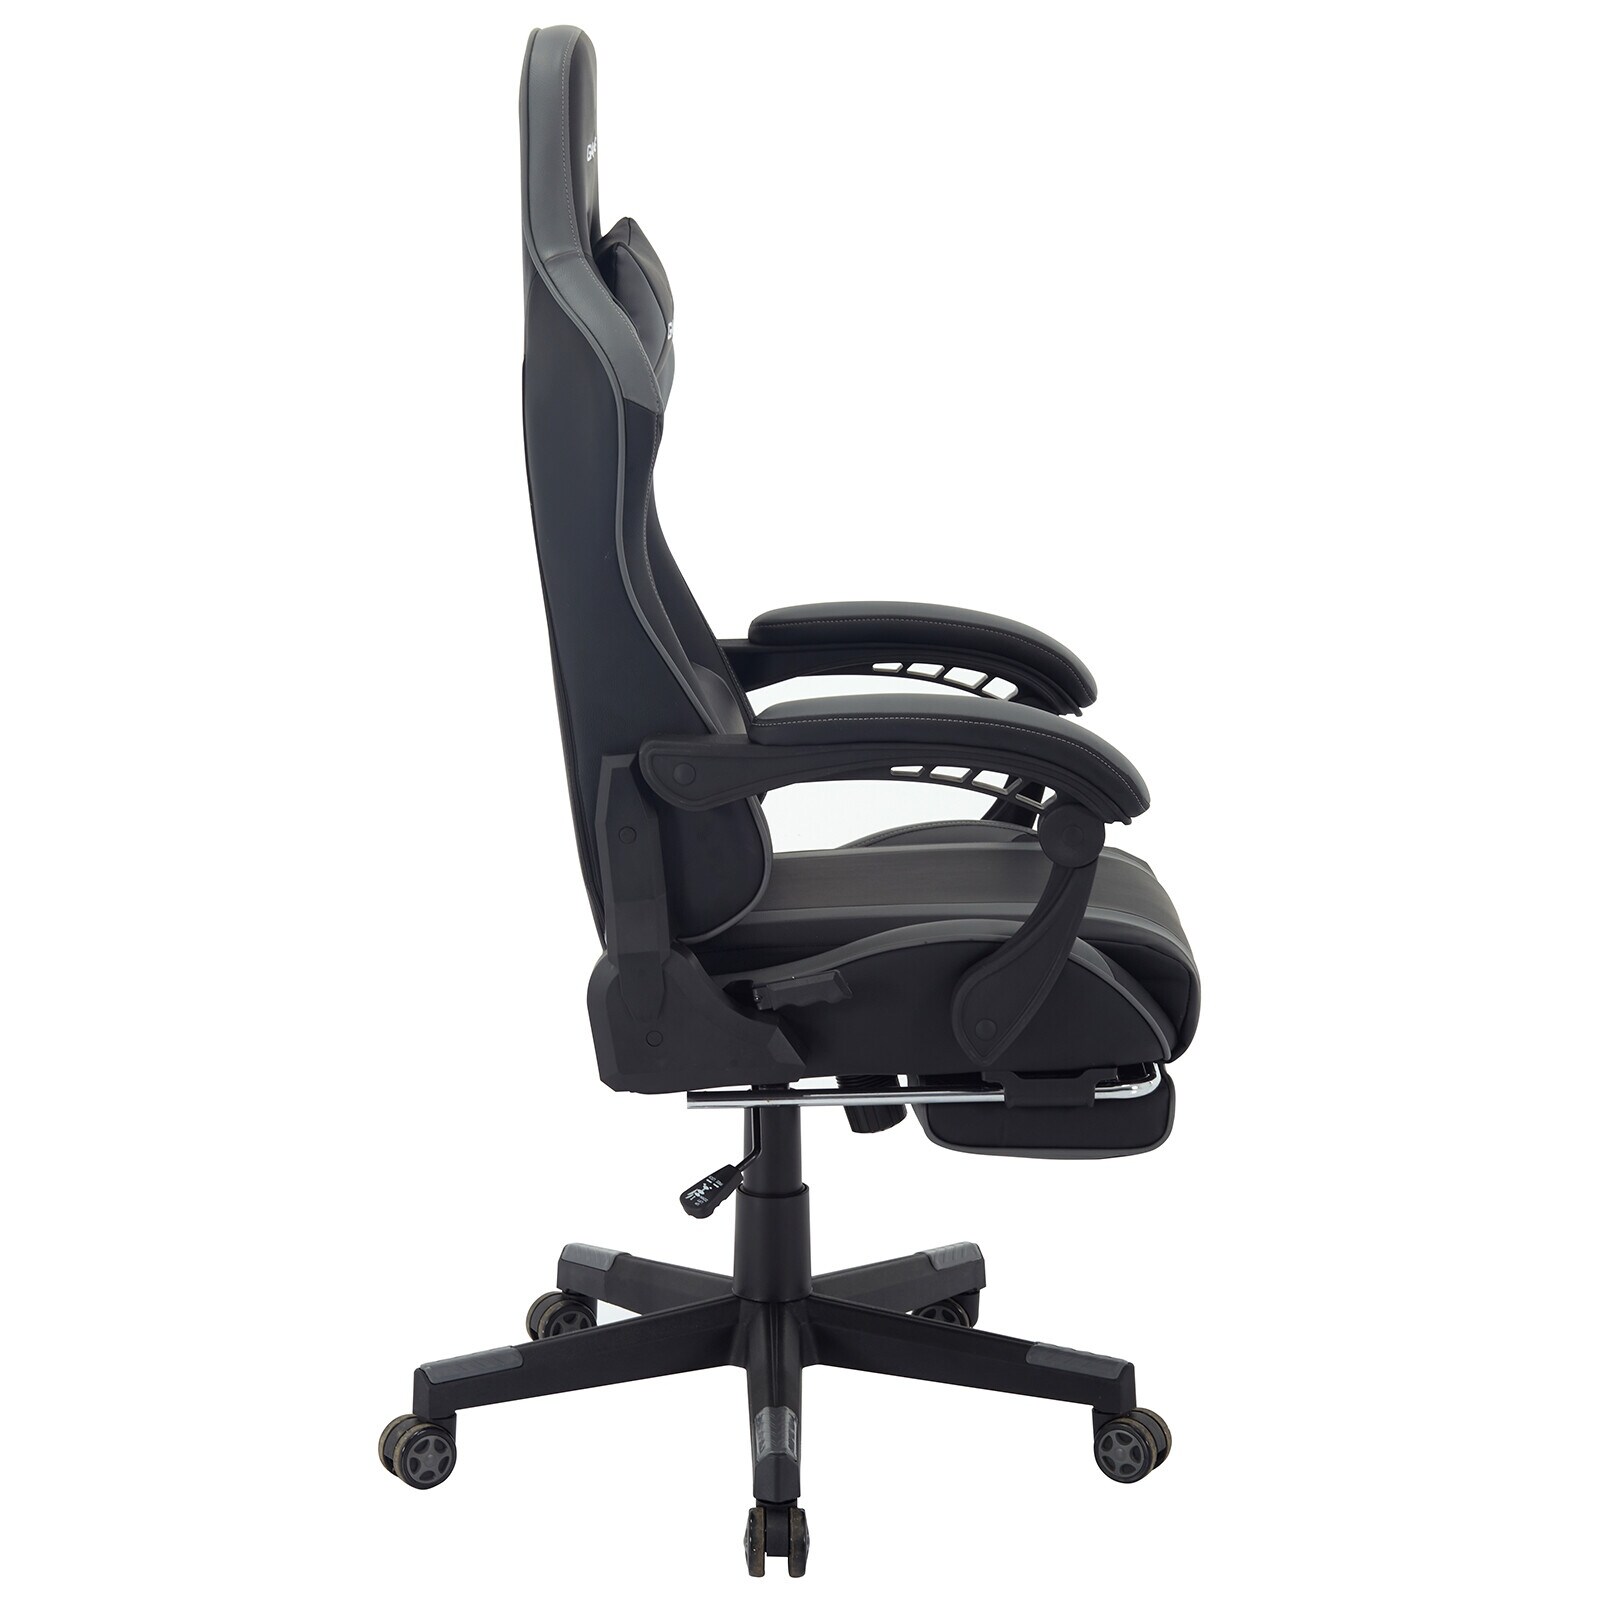 https://ak1.ostkcdn.com/images/products/is/images/direct/a08f0bdb26953e64ef1197b3c320bf8b6f74068a/Commodore-Gaming-Chair-Ergonomic-Adjustable-Height-Swivel-Recliner-with-Adjustable-Armrest-and-Retractable-Footrest.jpg